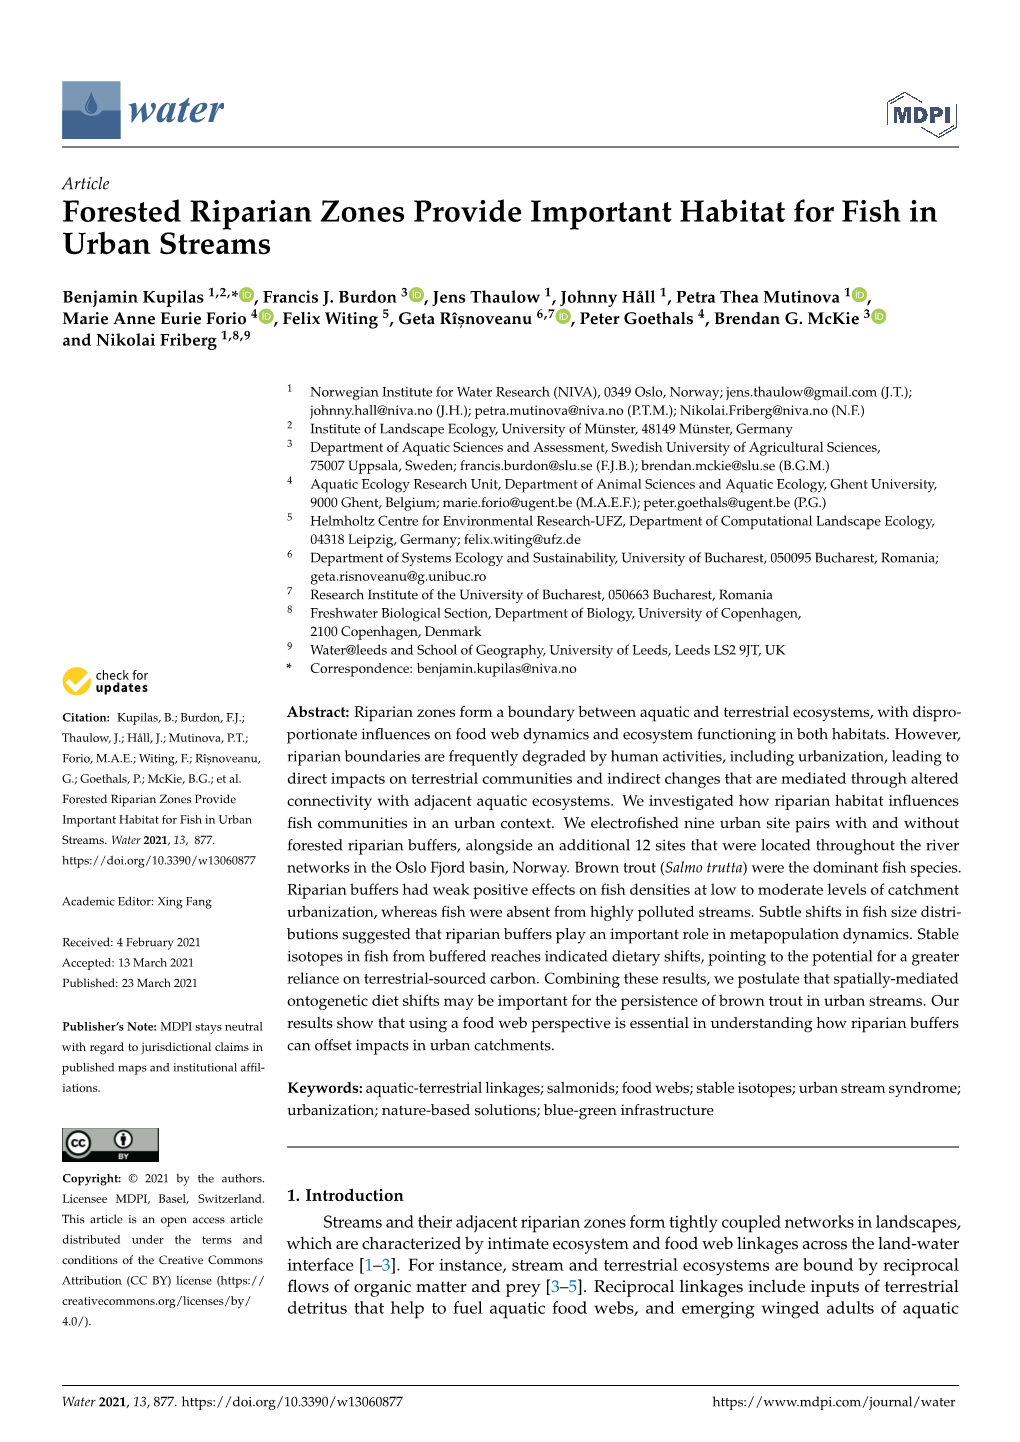 Forested Riparian Zones Provide Important Habitat for Fish in Urban Streams